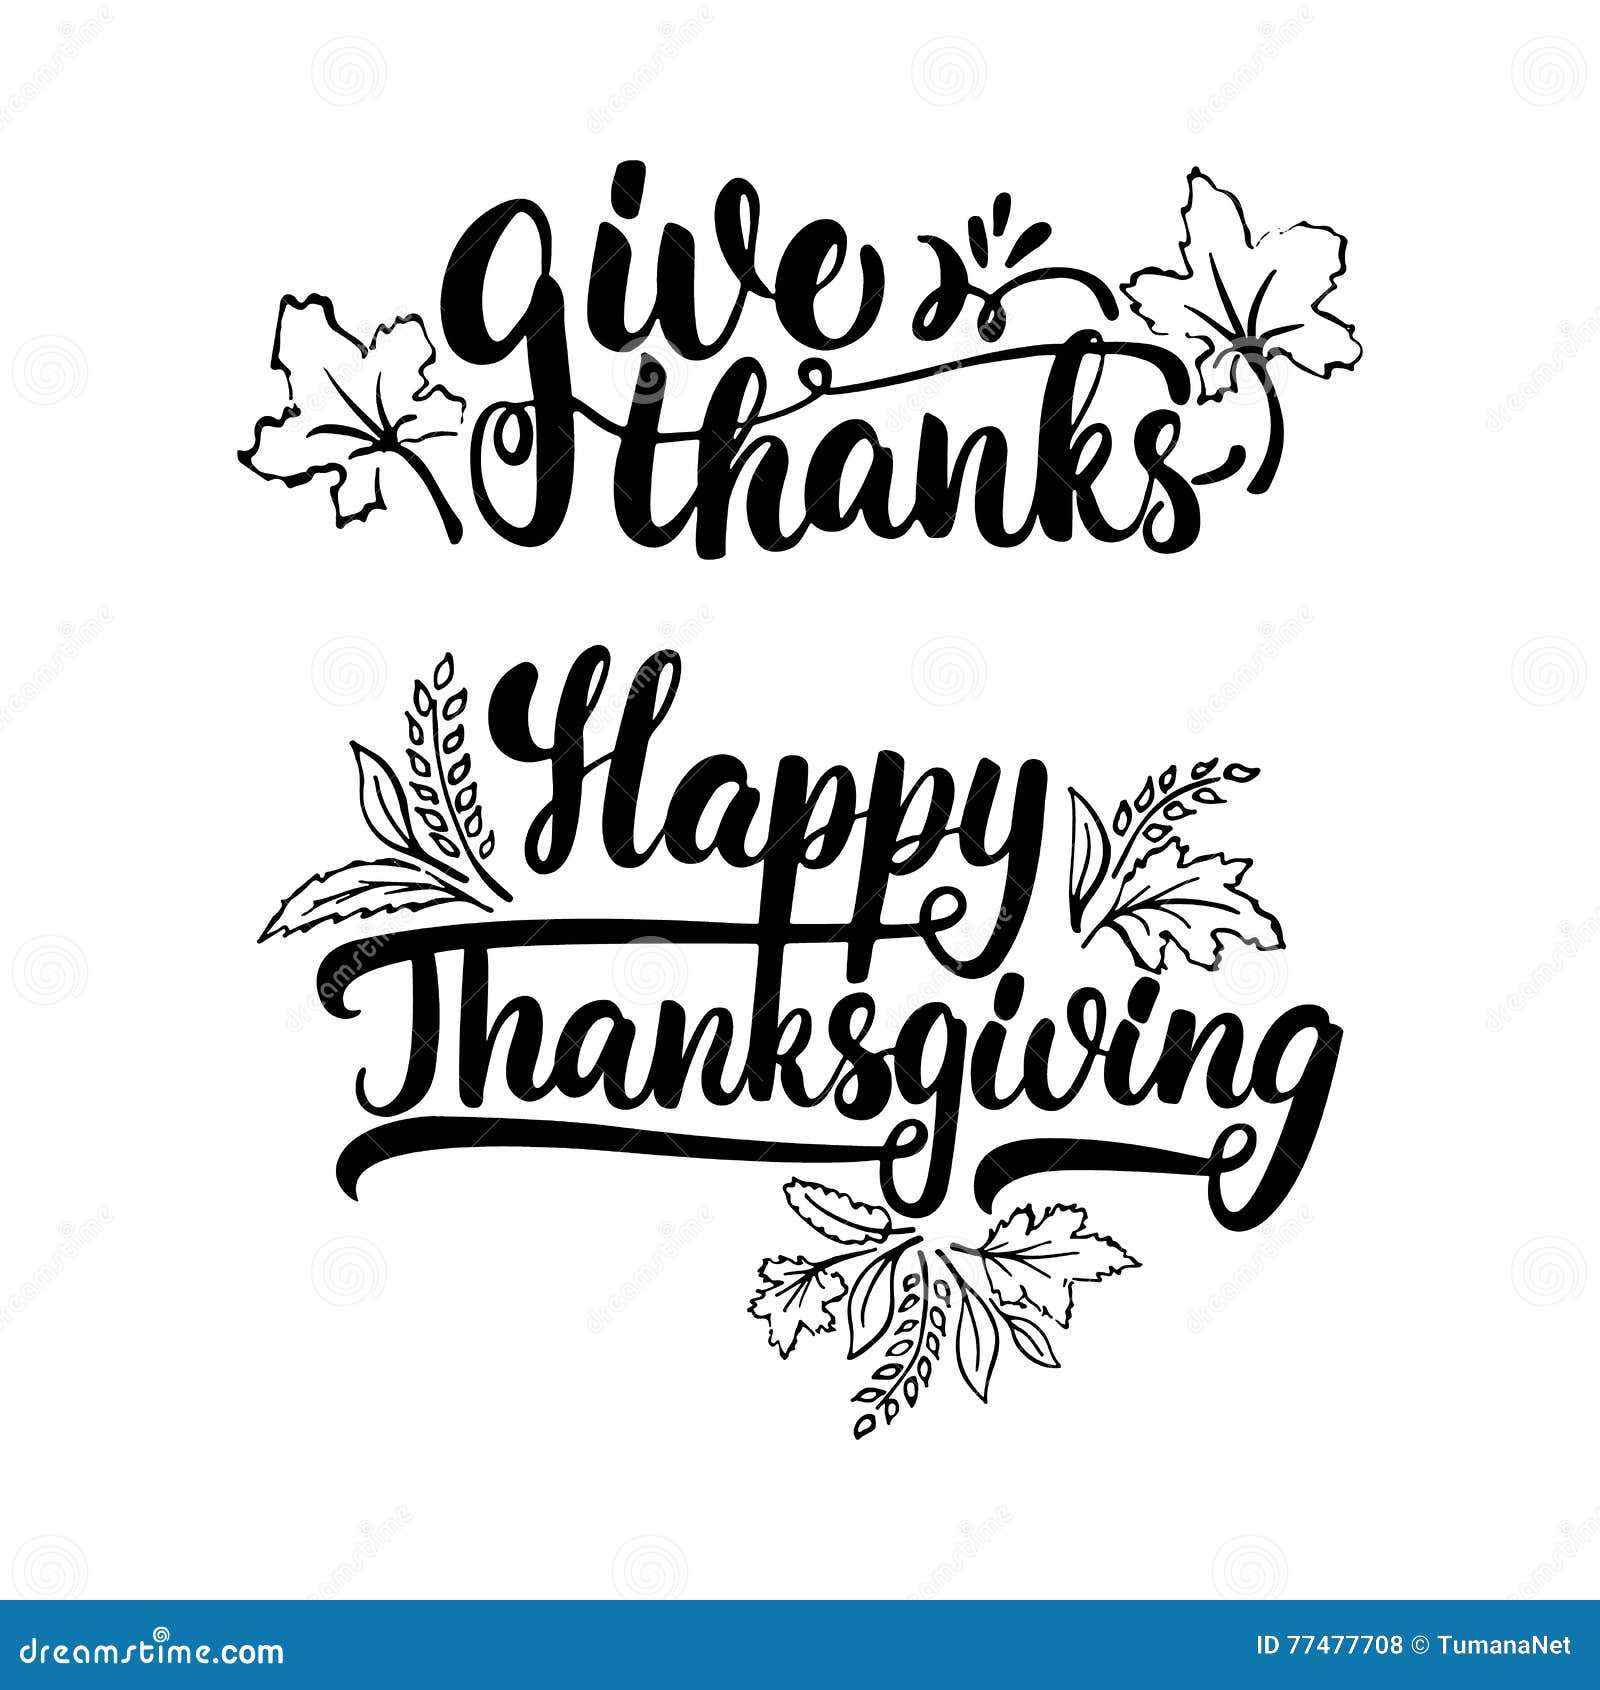 Give Thanks and Happy Thanksgiving - Lettering Calligraphy Phrase with ...